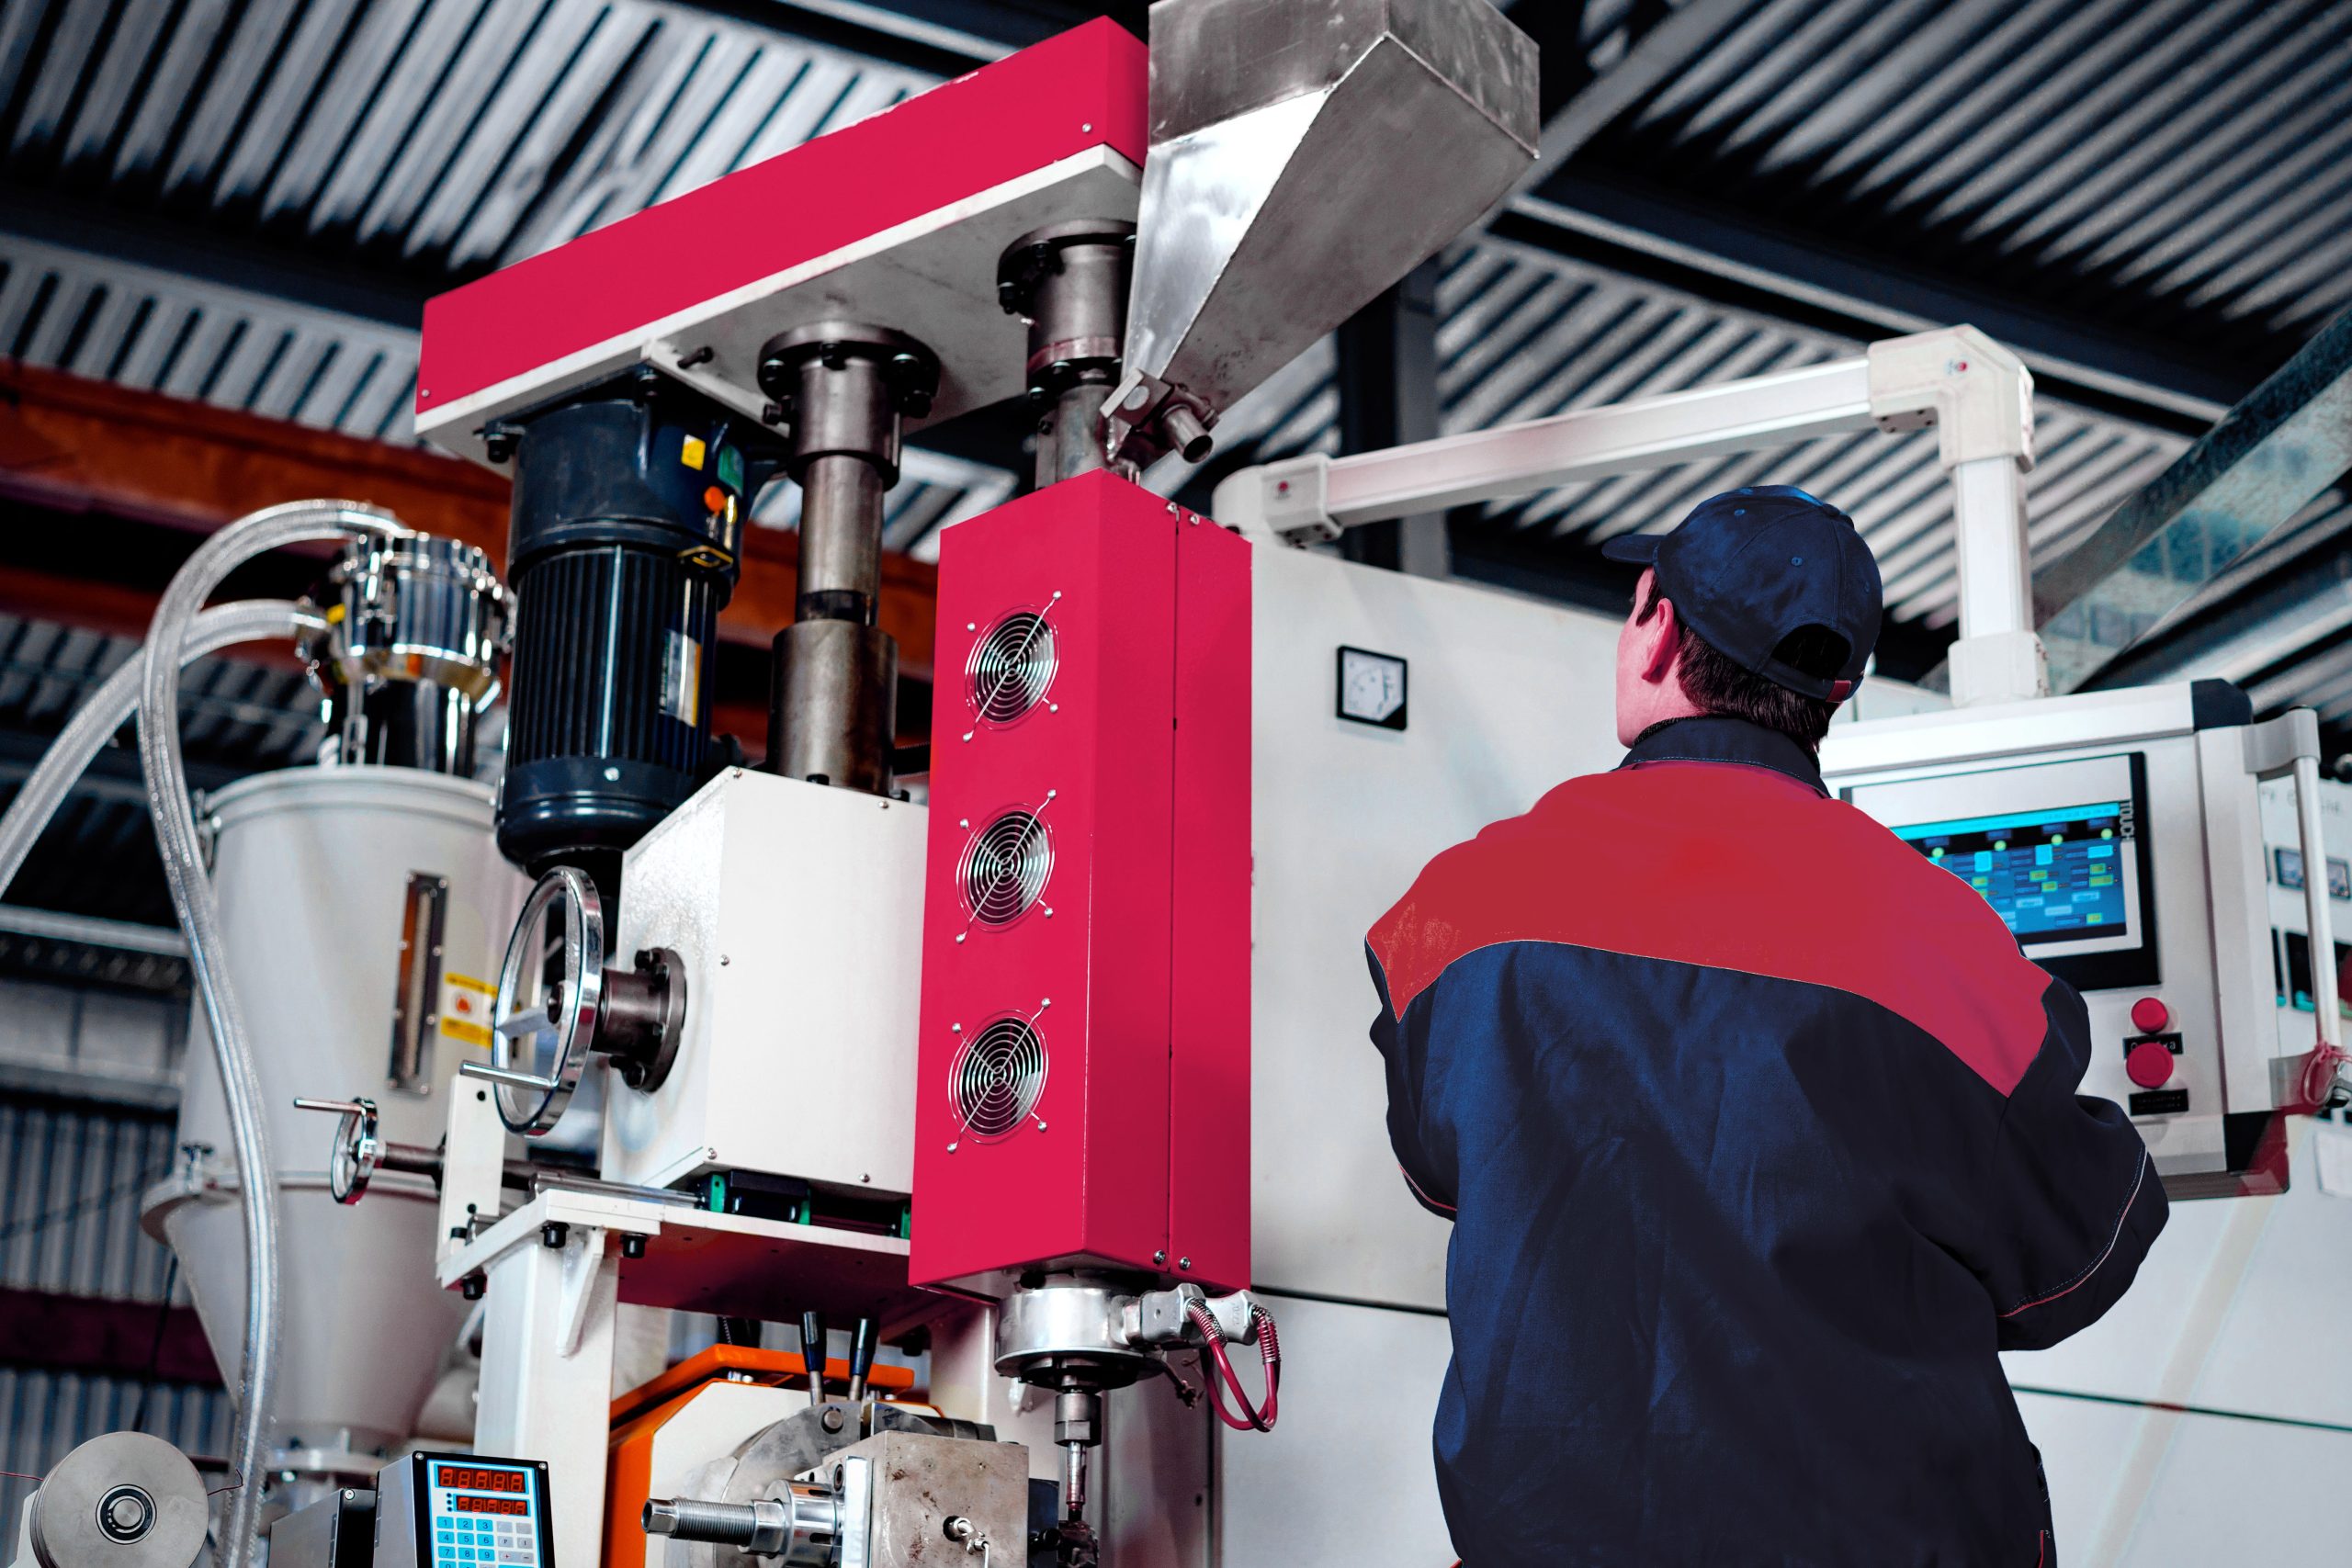 Reducing costs and boosting uptime with condition-based maintenance and real-time monitoring